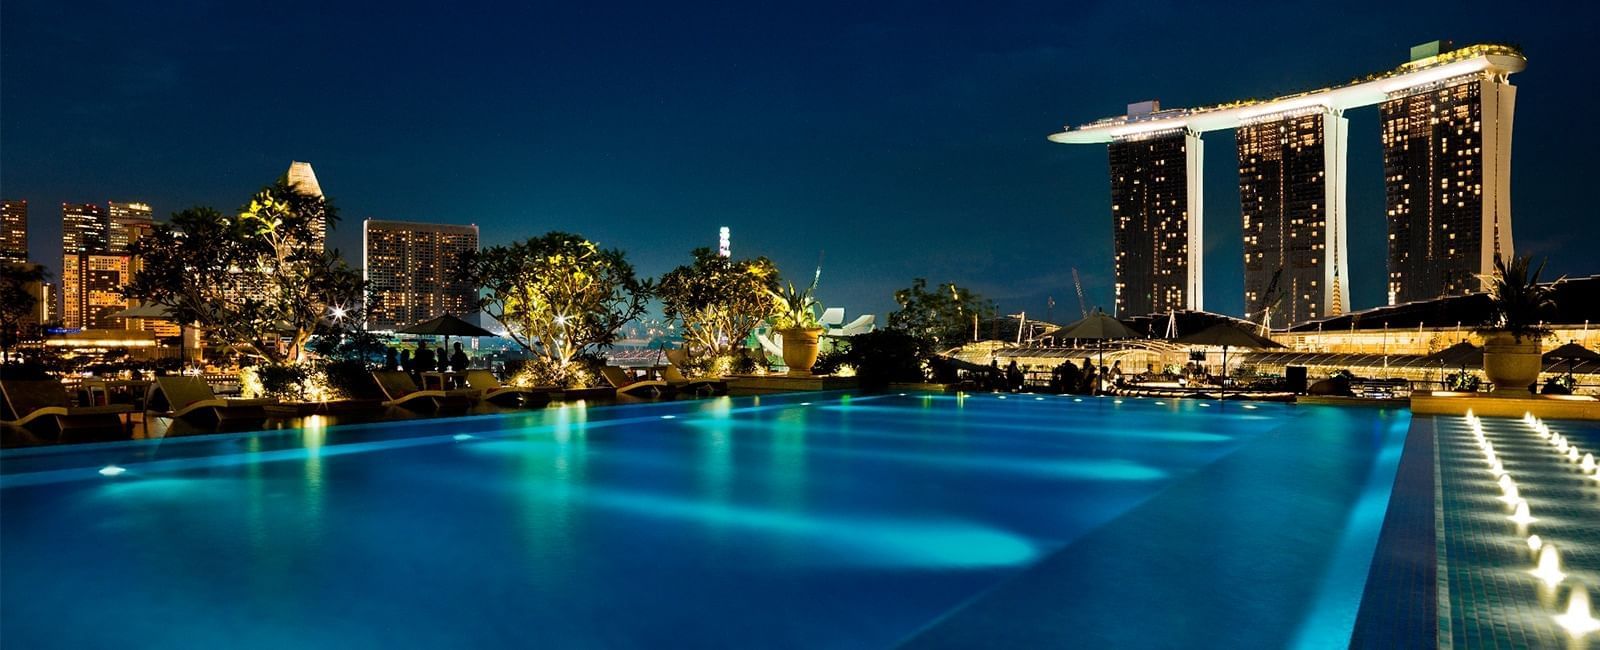 The pool with city view at Fullerton Bay Singapore